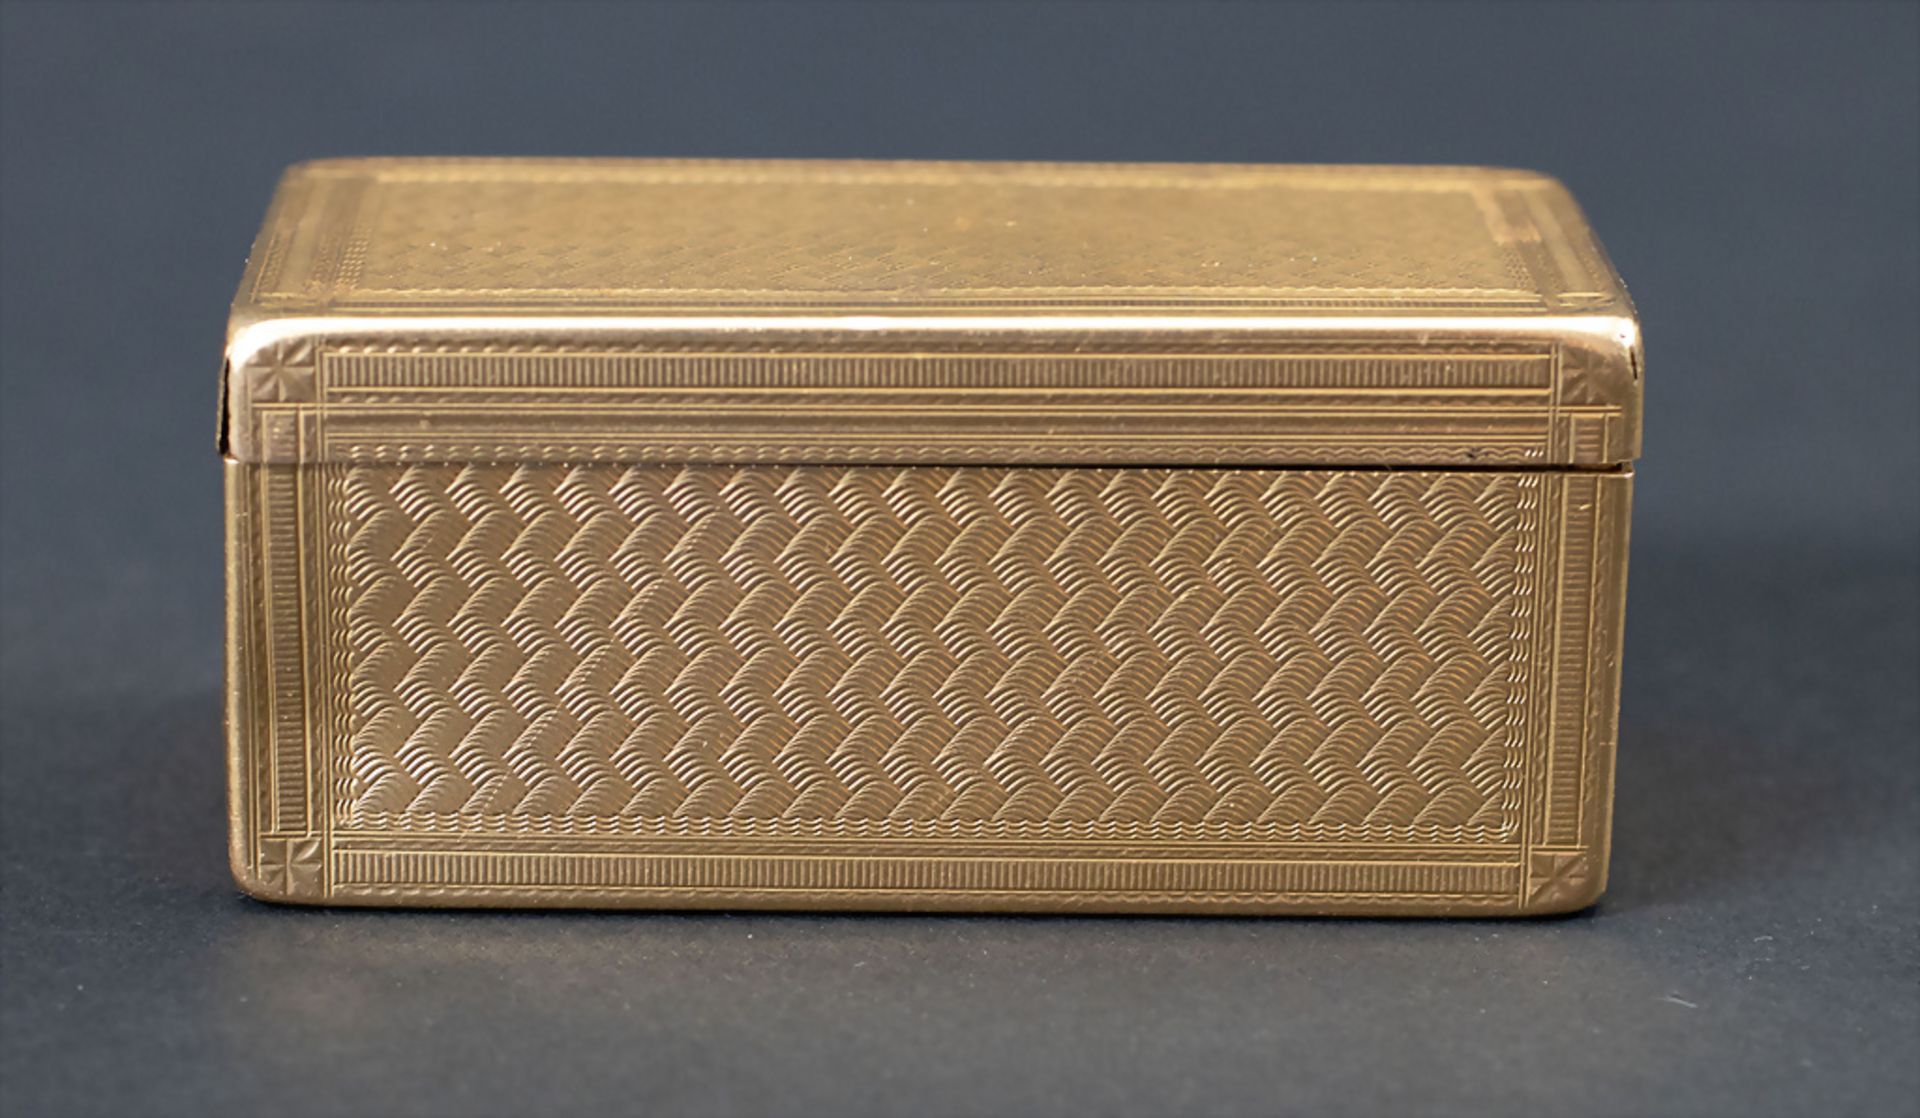 Gold Tabatiere / Schnupftabakdose / An 18 ct gold snuff box, Philippe Emanuel Garbe, Paris, 1768 - Image 2 of 5